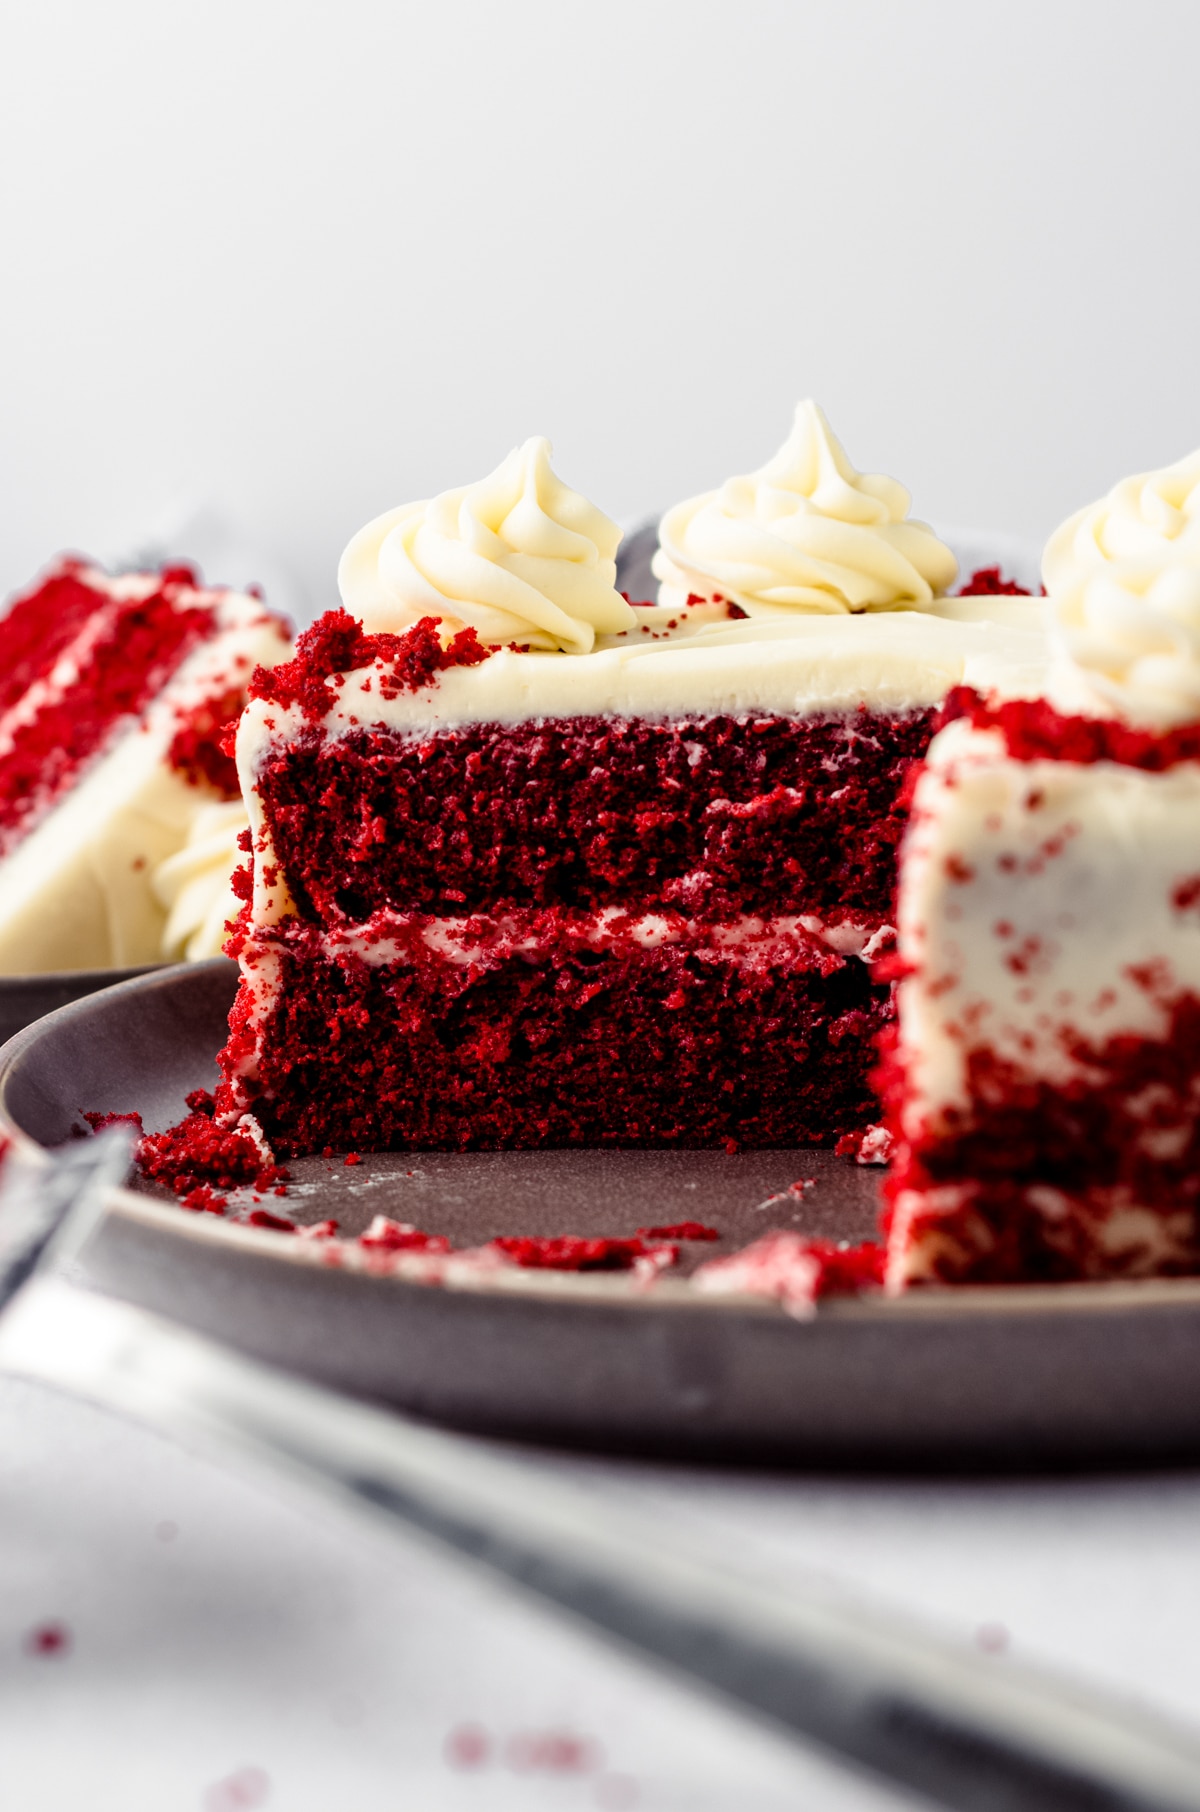 Side view of a sliced red velvet cake. You can see the inside of the cake and the layer of cream cheese frosting between the cake layers.